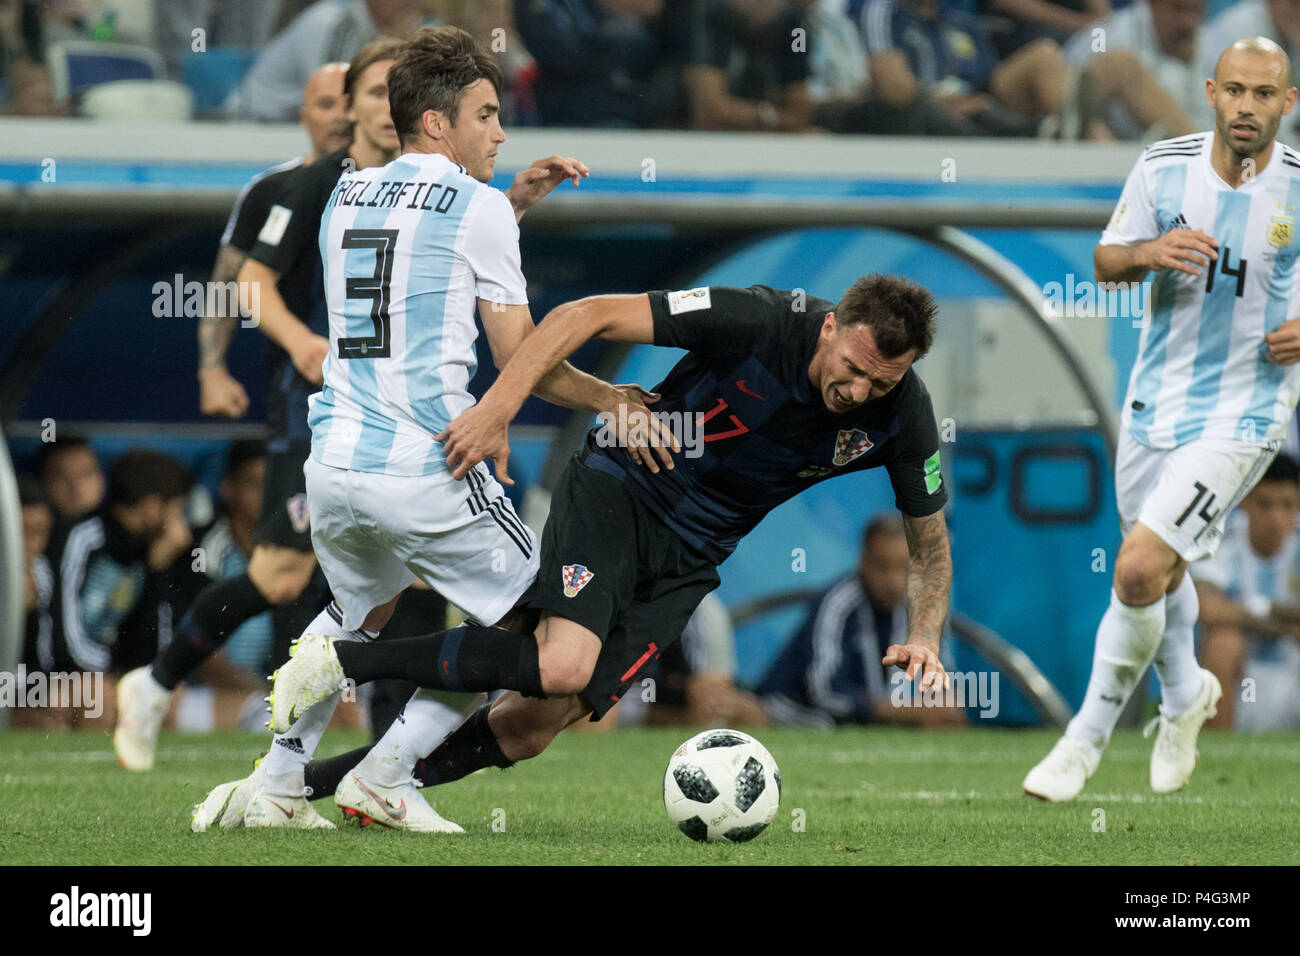 Nicolas TAGLIAFICO (left, ARG) versus Mario MANDZUKIC (CRO), action, duels, Argentina (ARG) - Croatia (CRO) 0: 3, preliminary round, Group D, match 23, on 21.06.2018 in Moscow; Football World Cup 2018 in Russia from 14.06. - 15.07.2018. | usage worldwide Credit: dpa picture alliance/Alamy Live News Stock Photo